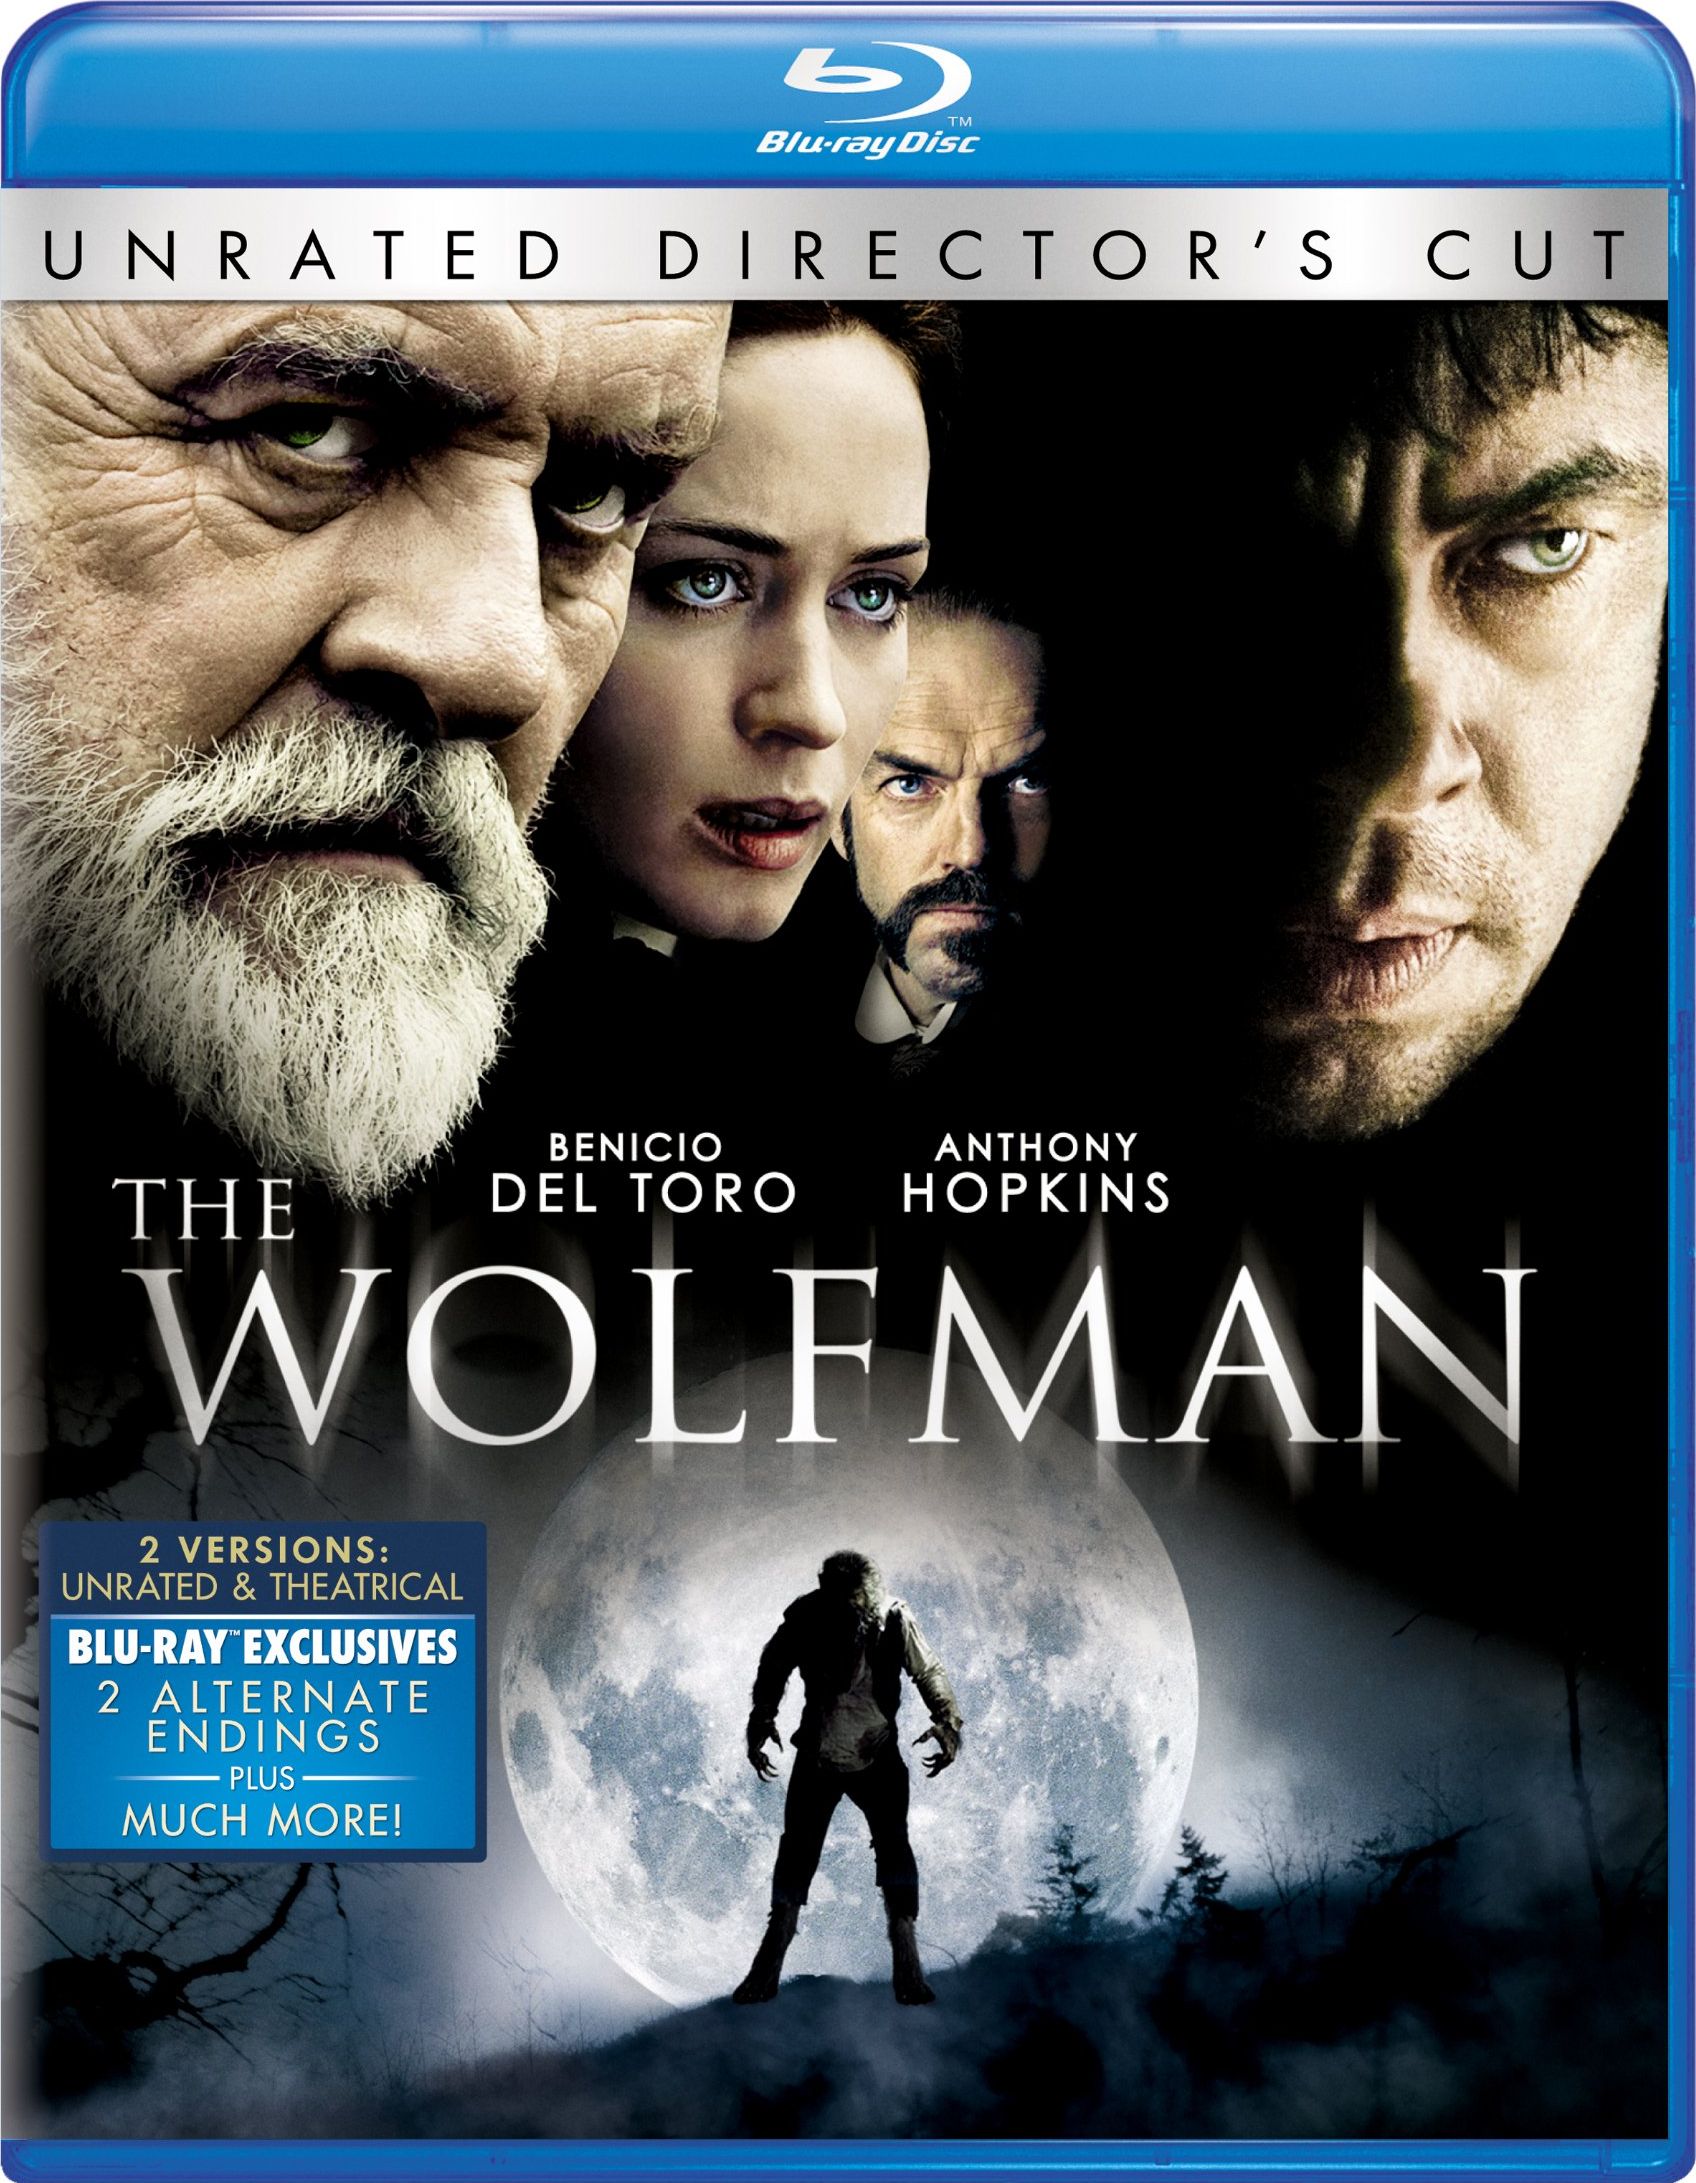 http://www.dvdsreleasedates.com/covers/the-wolfman-blu-ray-cover-27.jpg